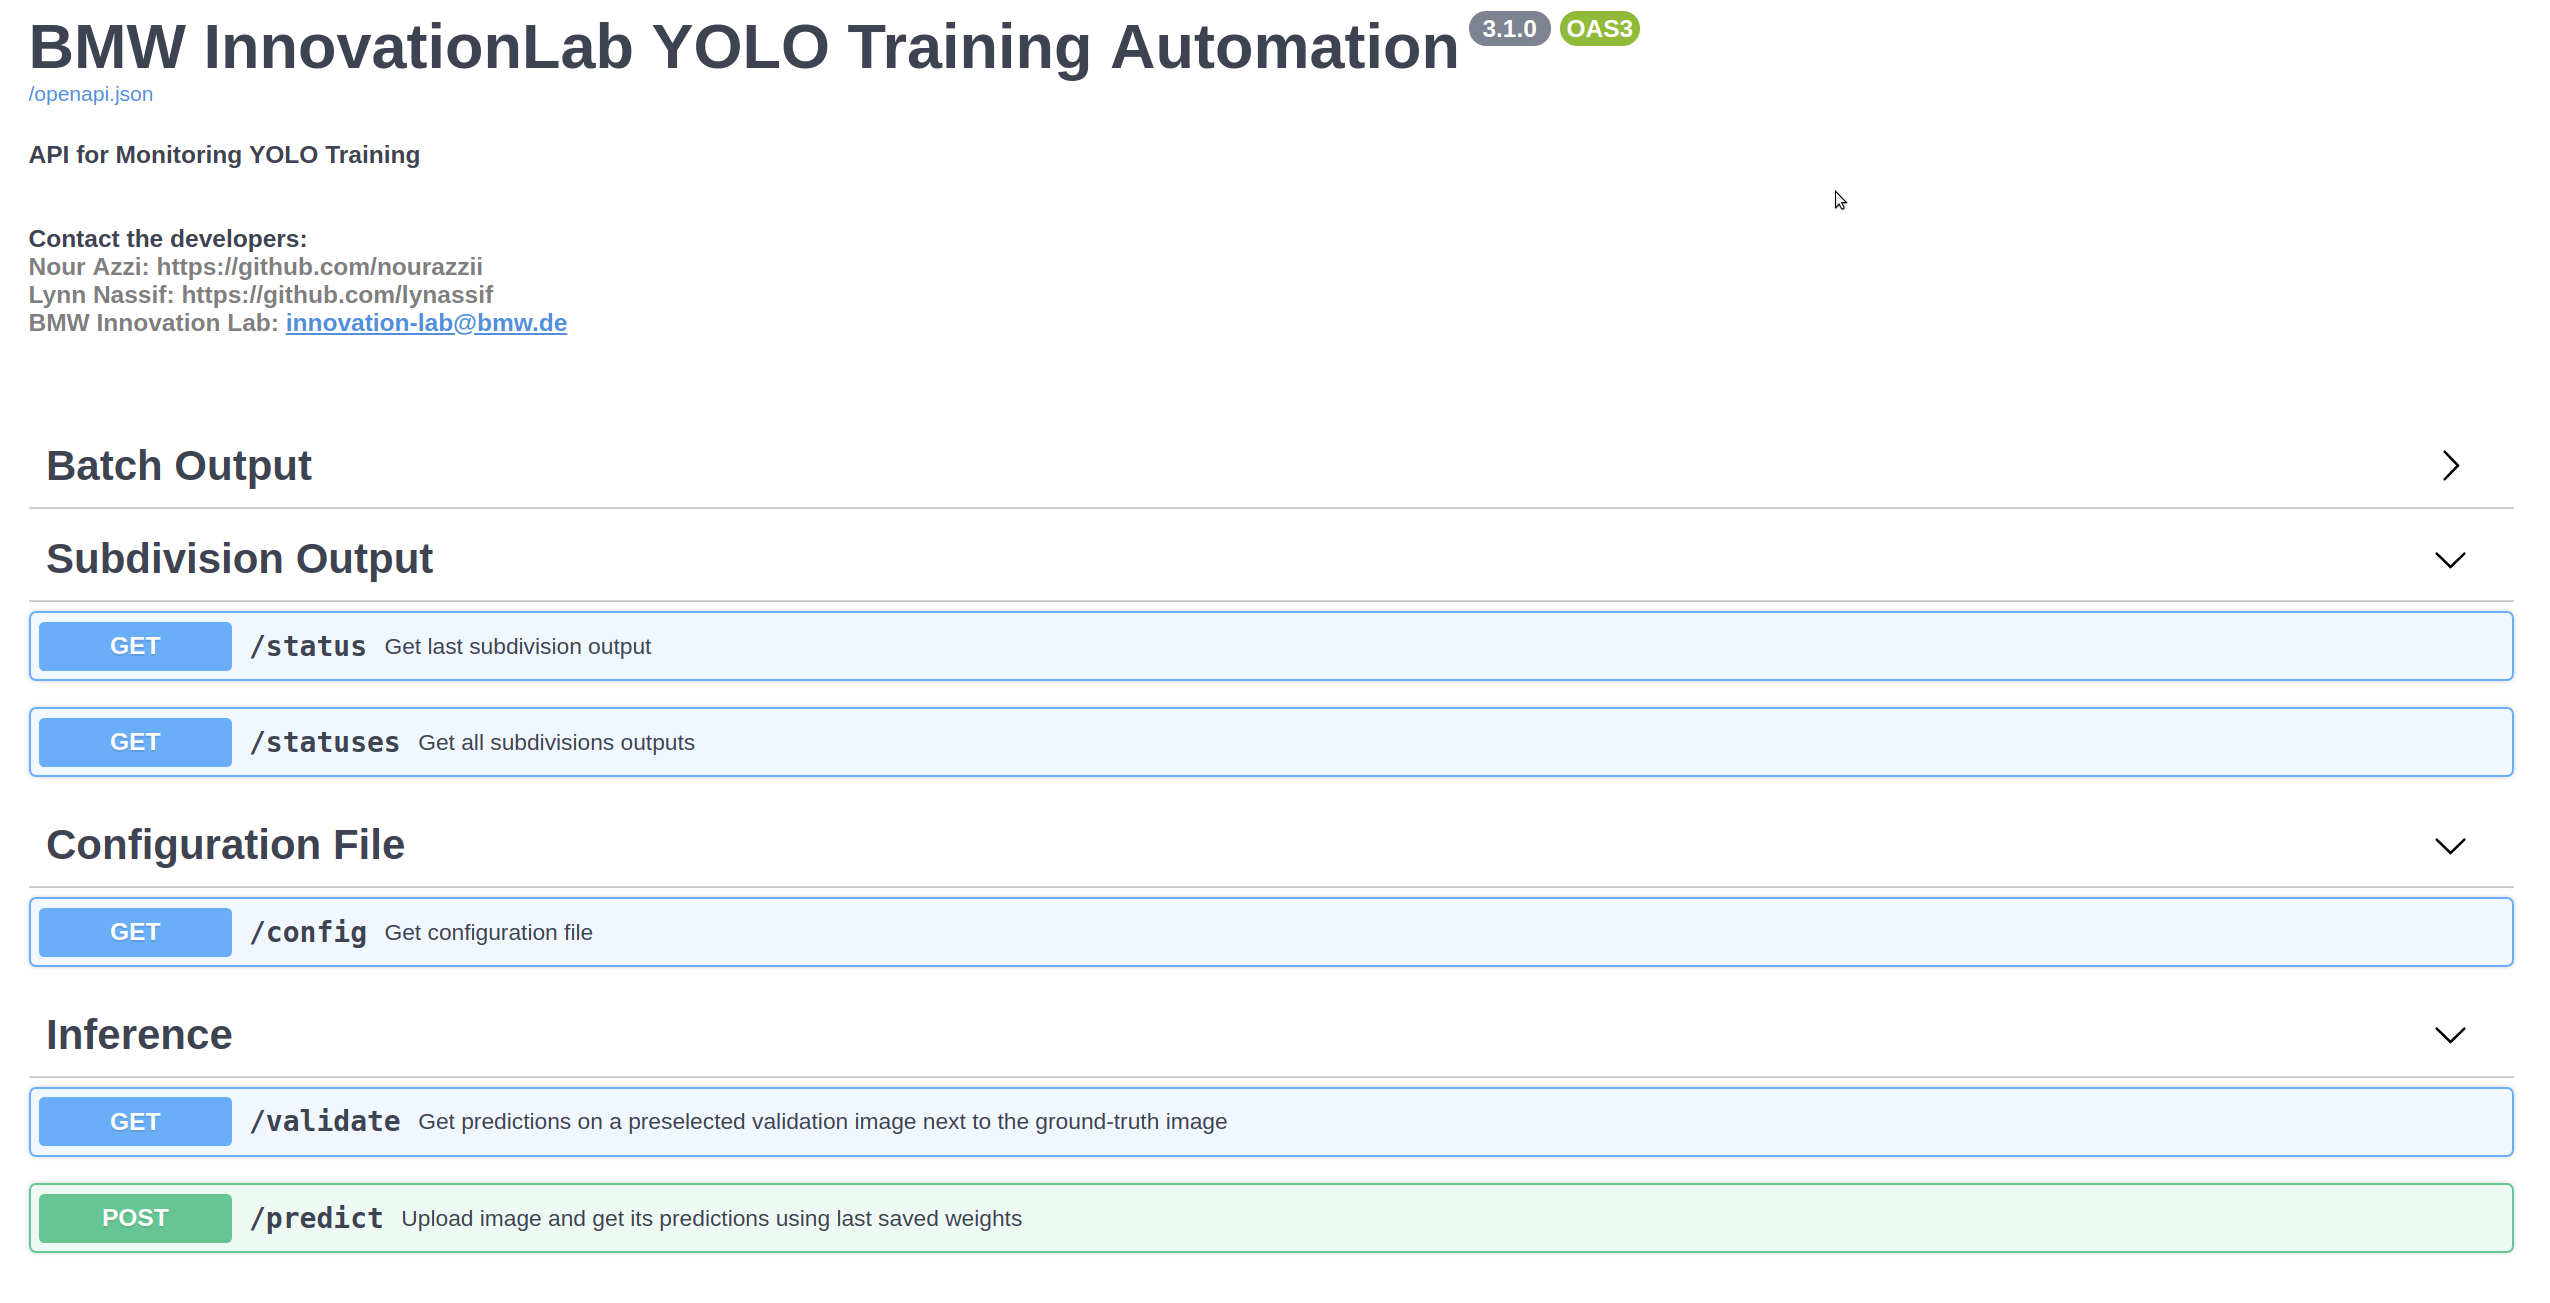 swagger_yolo_training.png